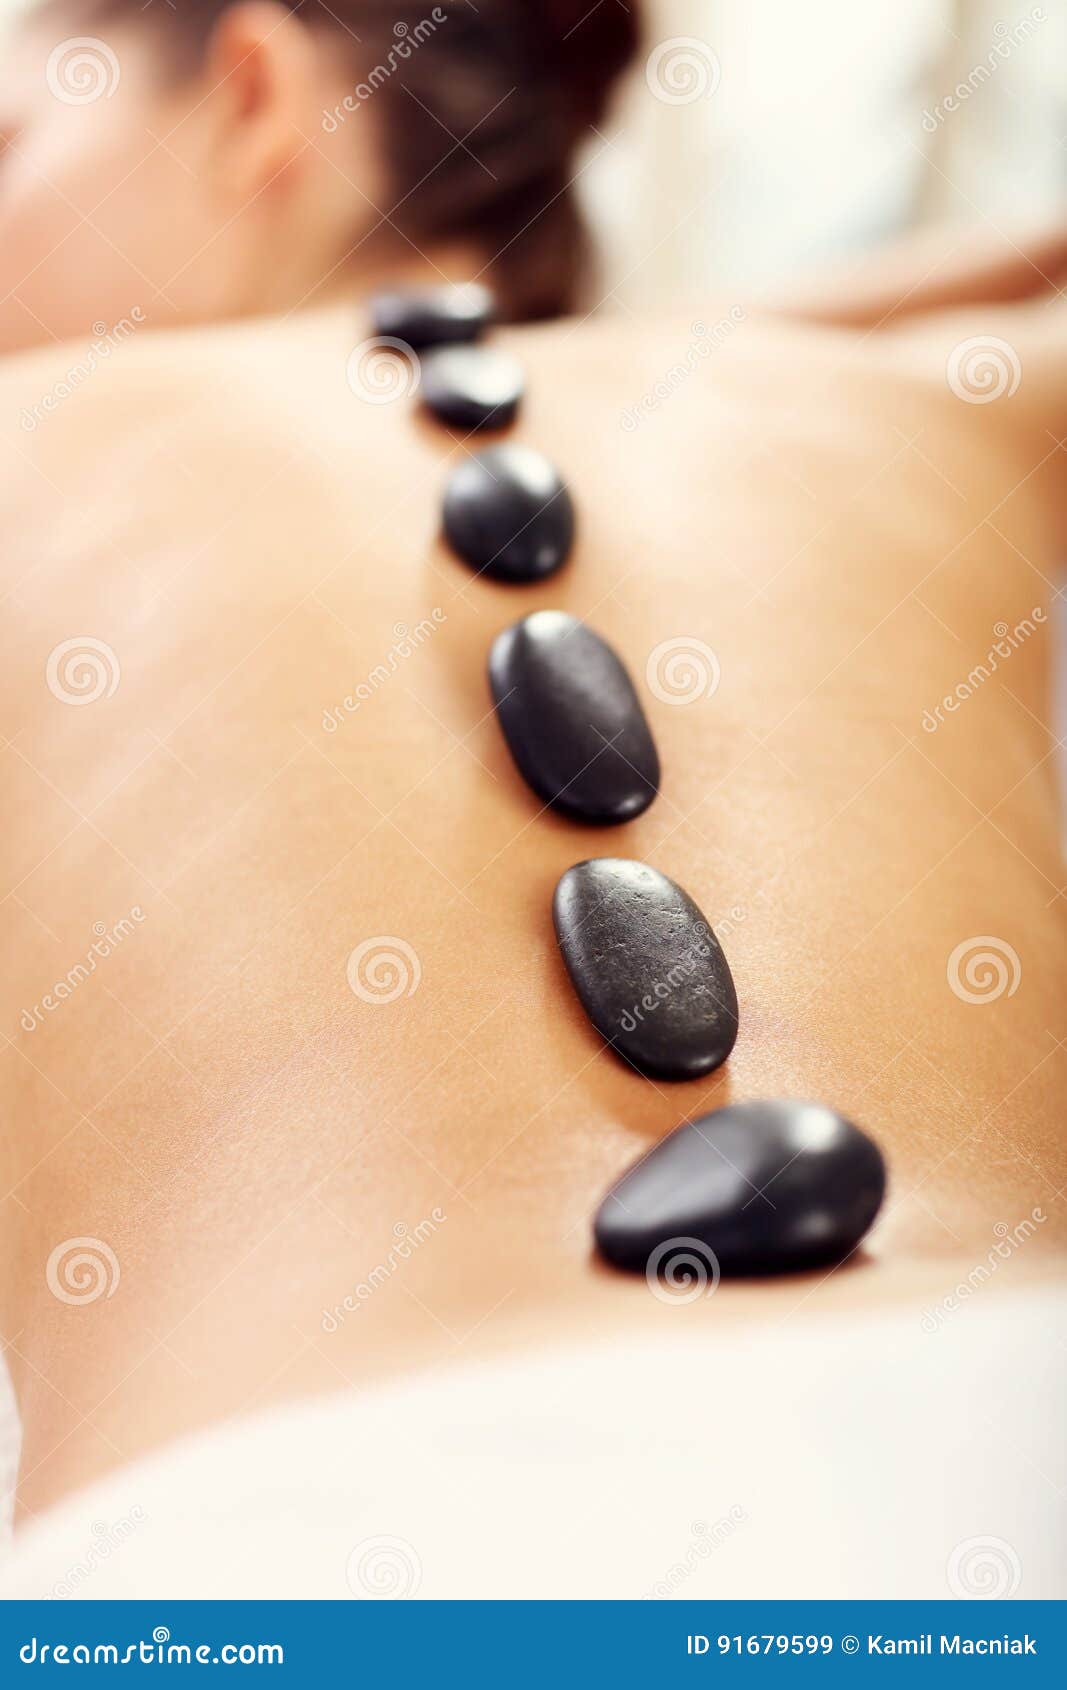 Beautiful Woman Getting Stone Massage In Spa Stock Image Image Of